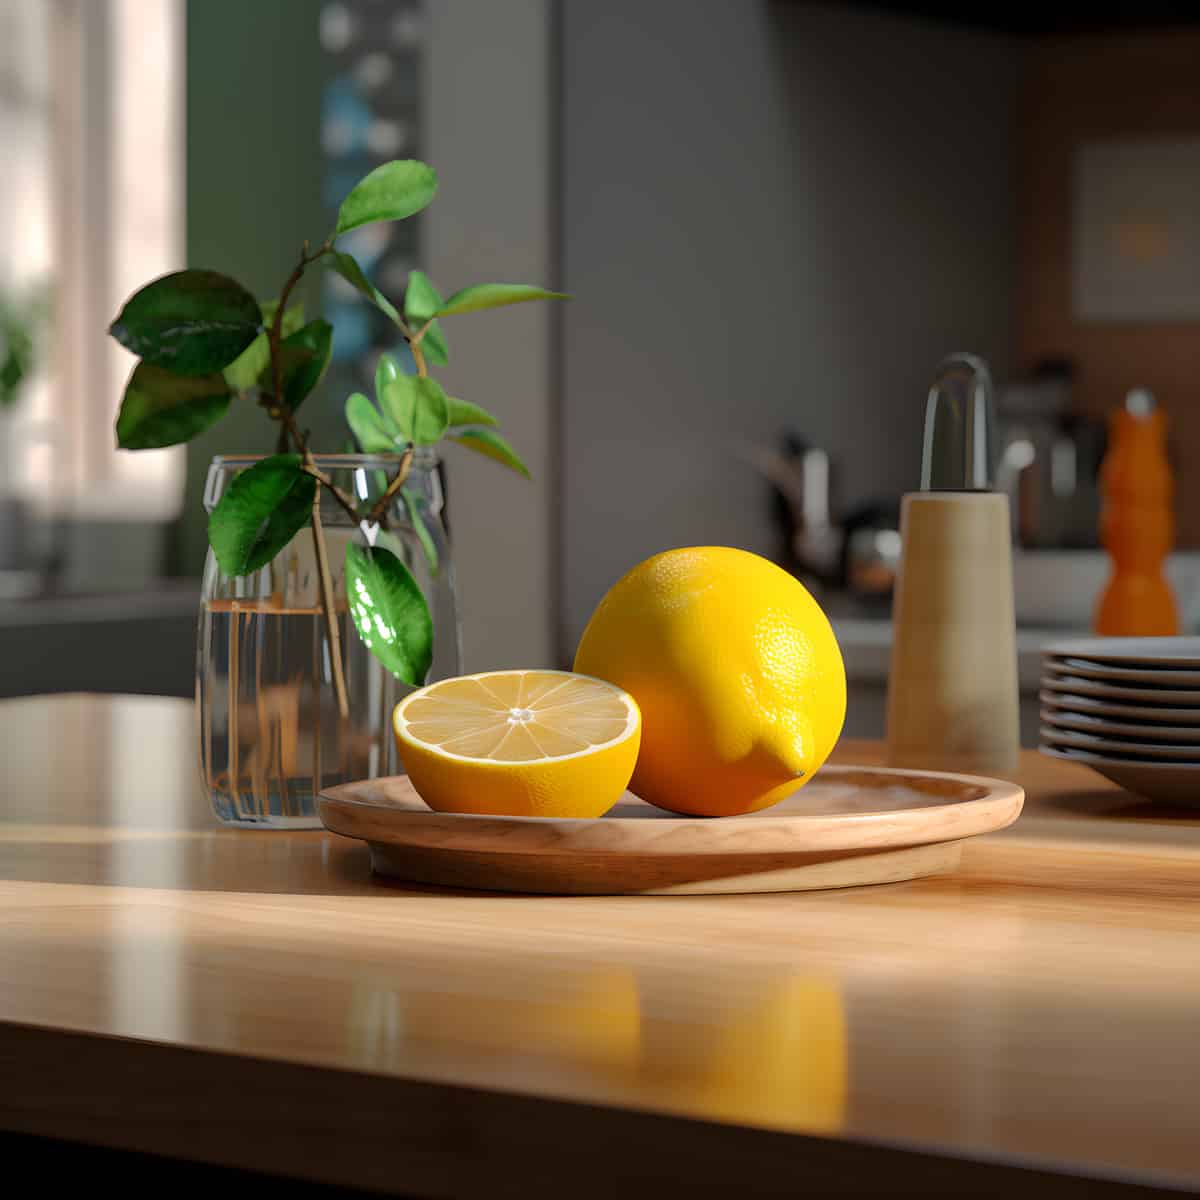 Citron on a kitchen counter